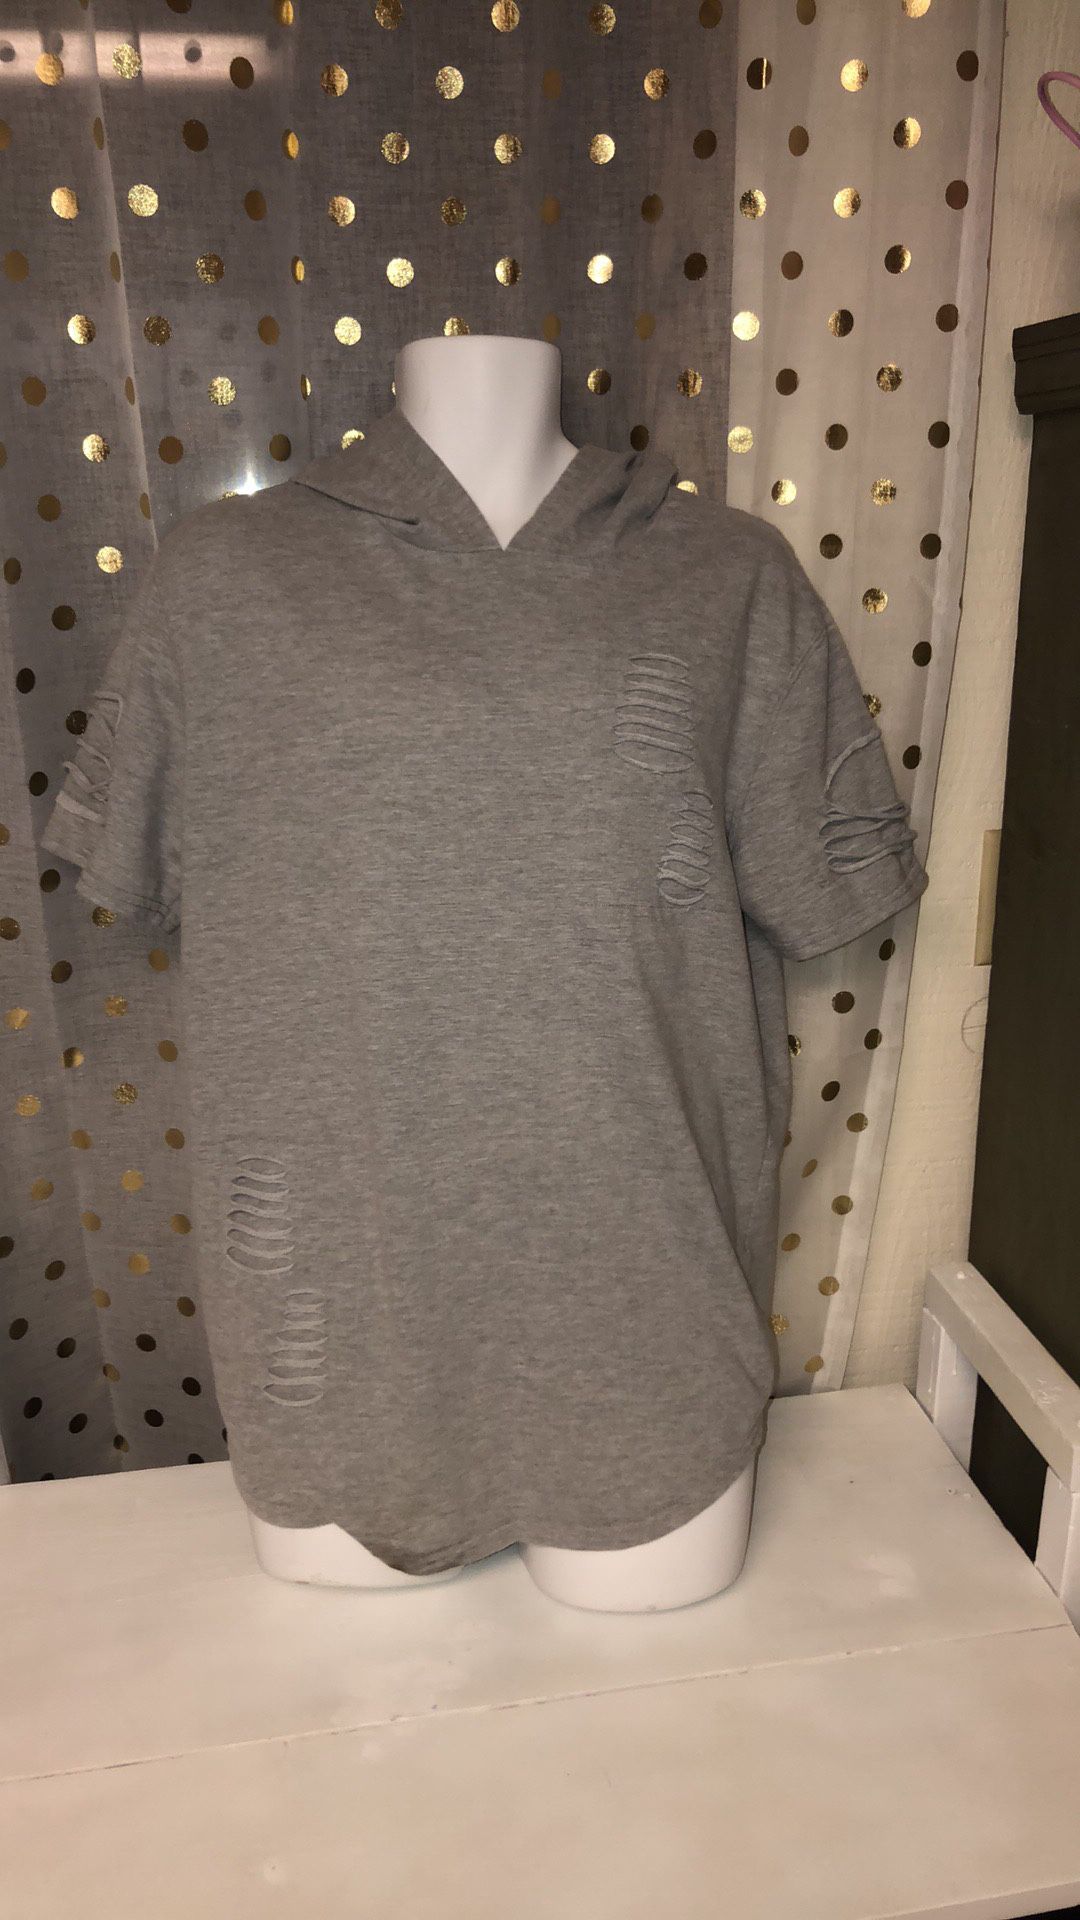 Men’s size large Carbon ripped look grey hoodie shirt